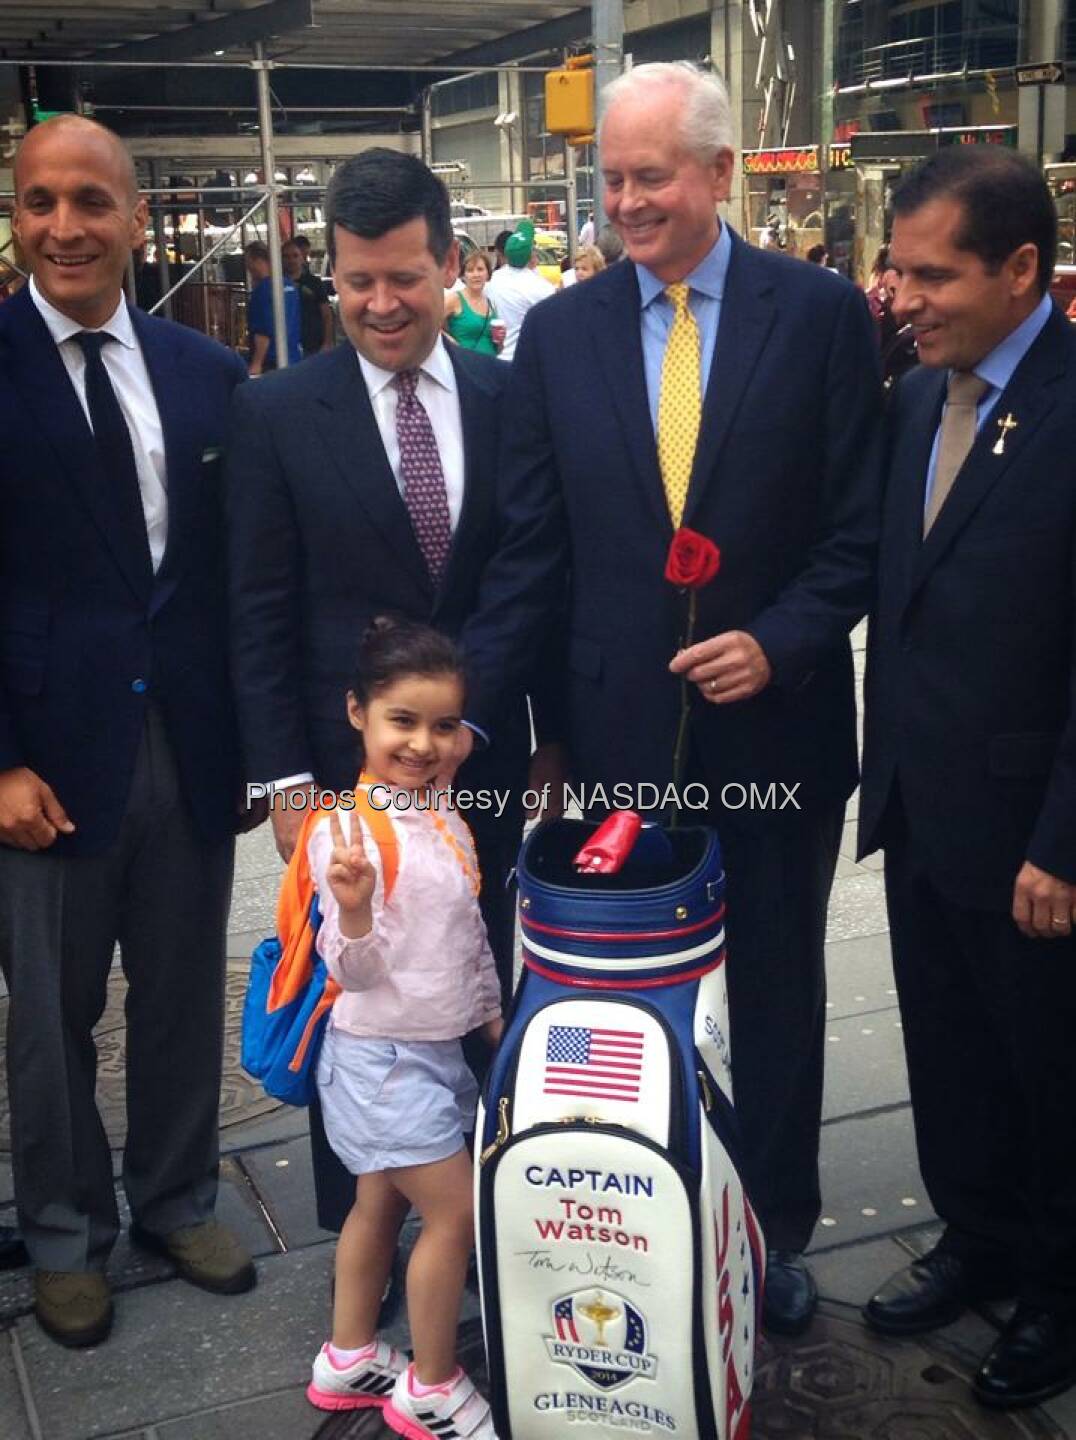 A young fan of the game presents PGA of America leadership with a rose following the #NASDAQ opening bell in Times Square #SheKnowsShesFly #FutureLPGAStar  Source: http://facebook.com/NASDAQ